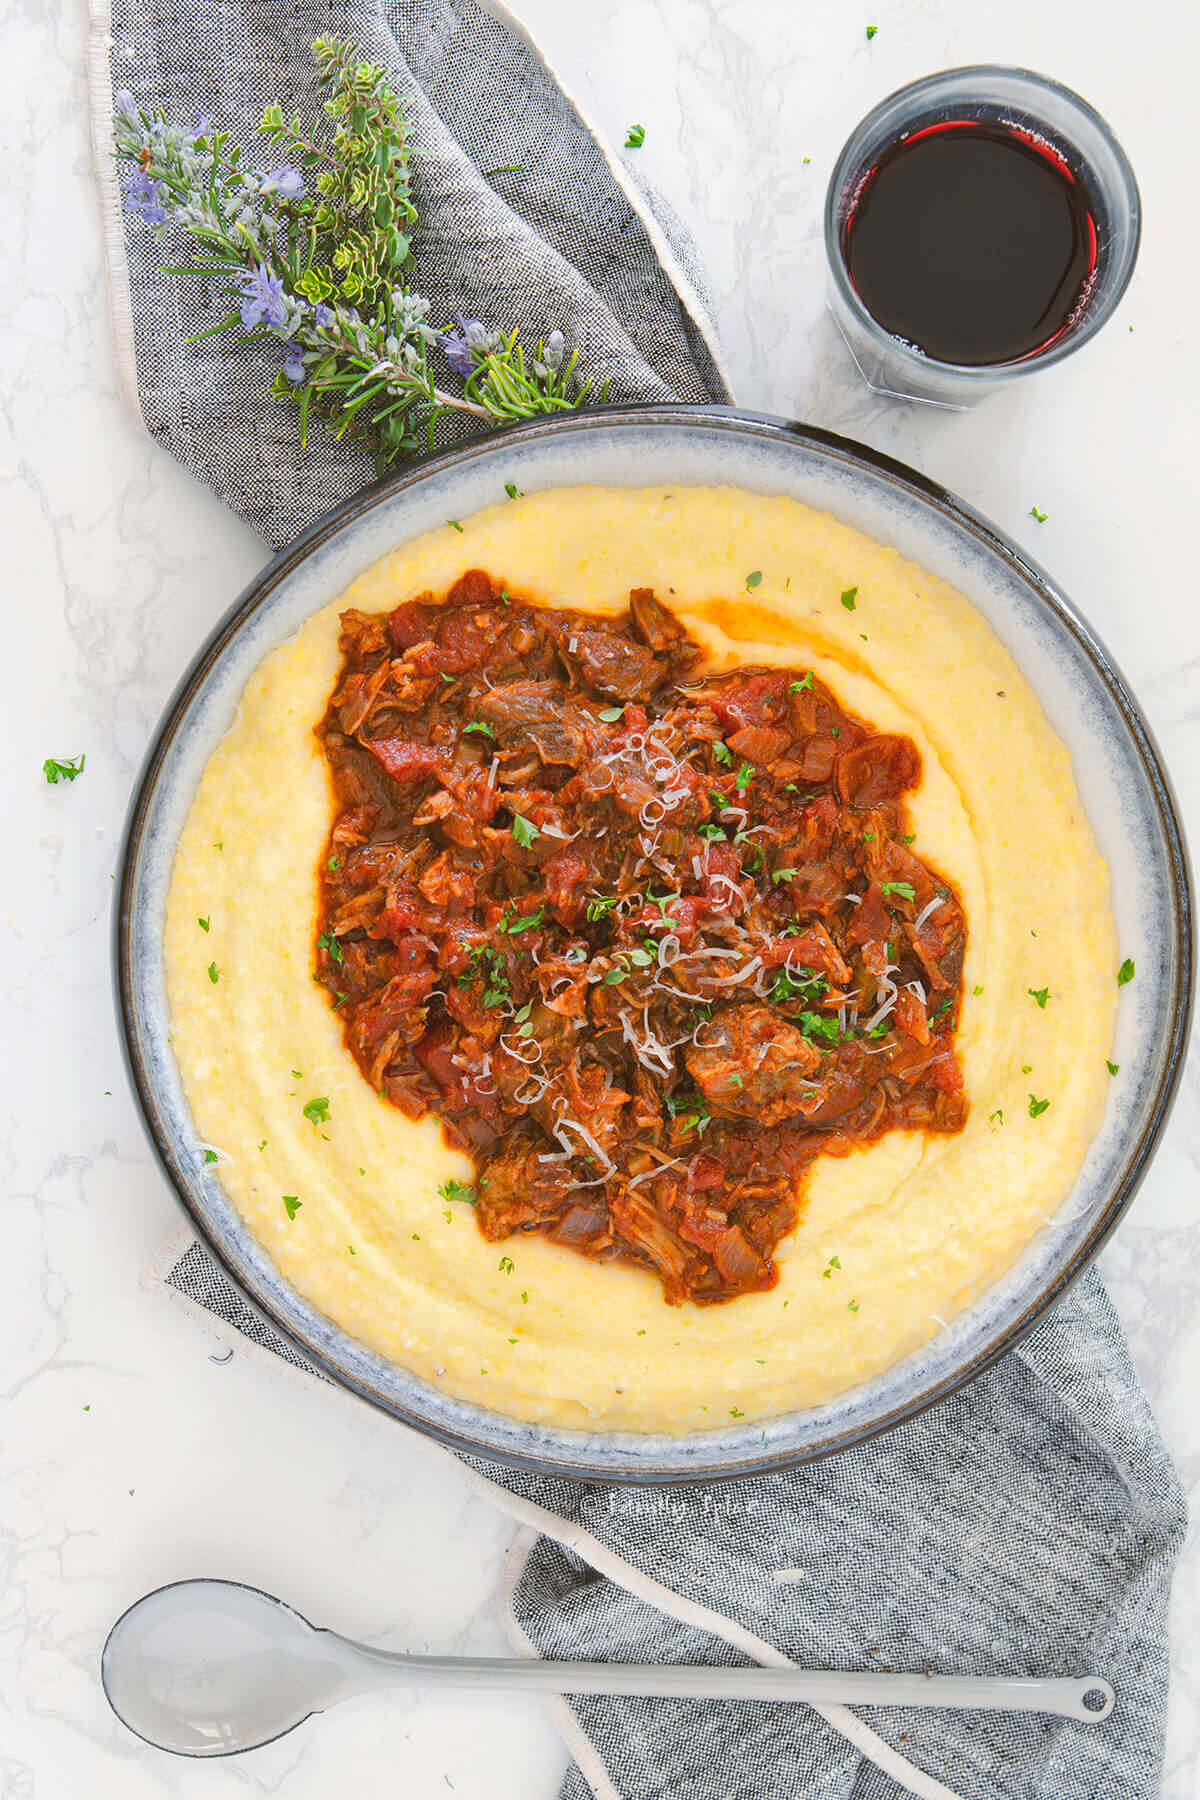 Top view closeup of a shallow bowl with creamy polenta and topped with pork ragu on a napkin with a glass of red wine next to it